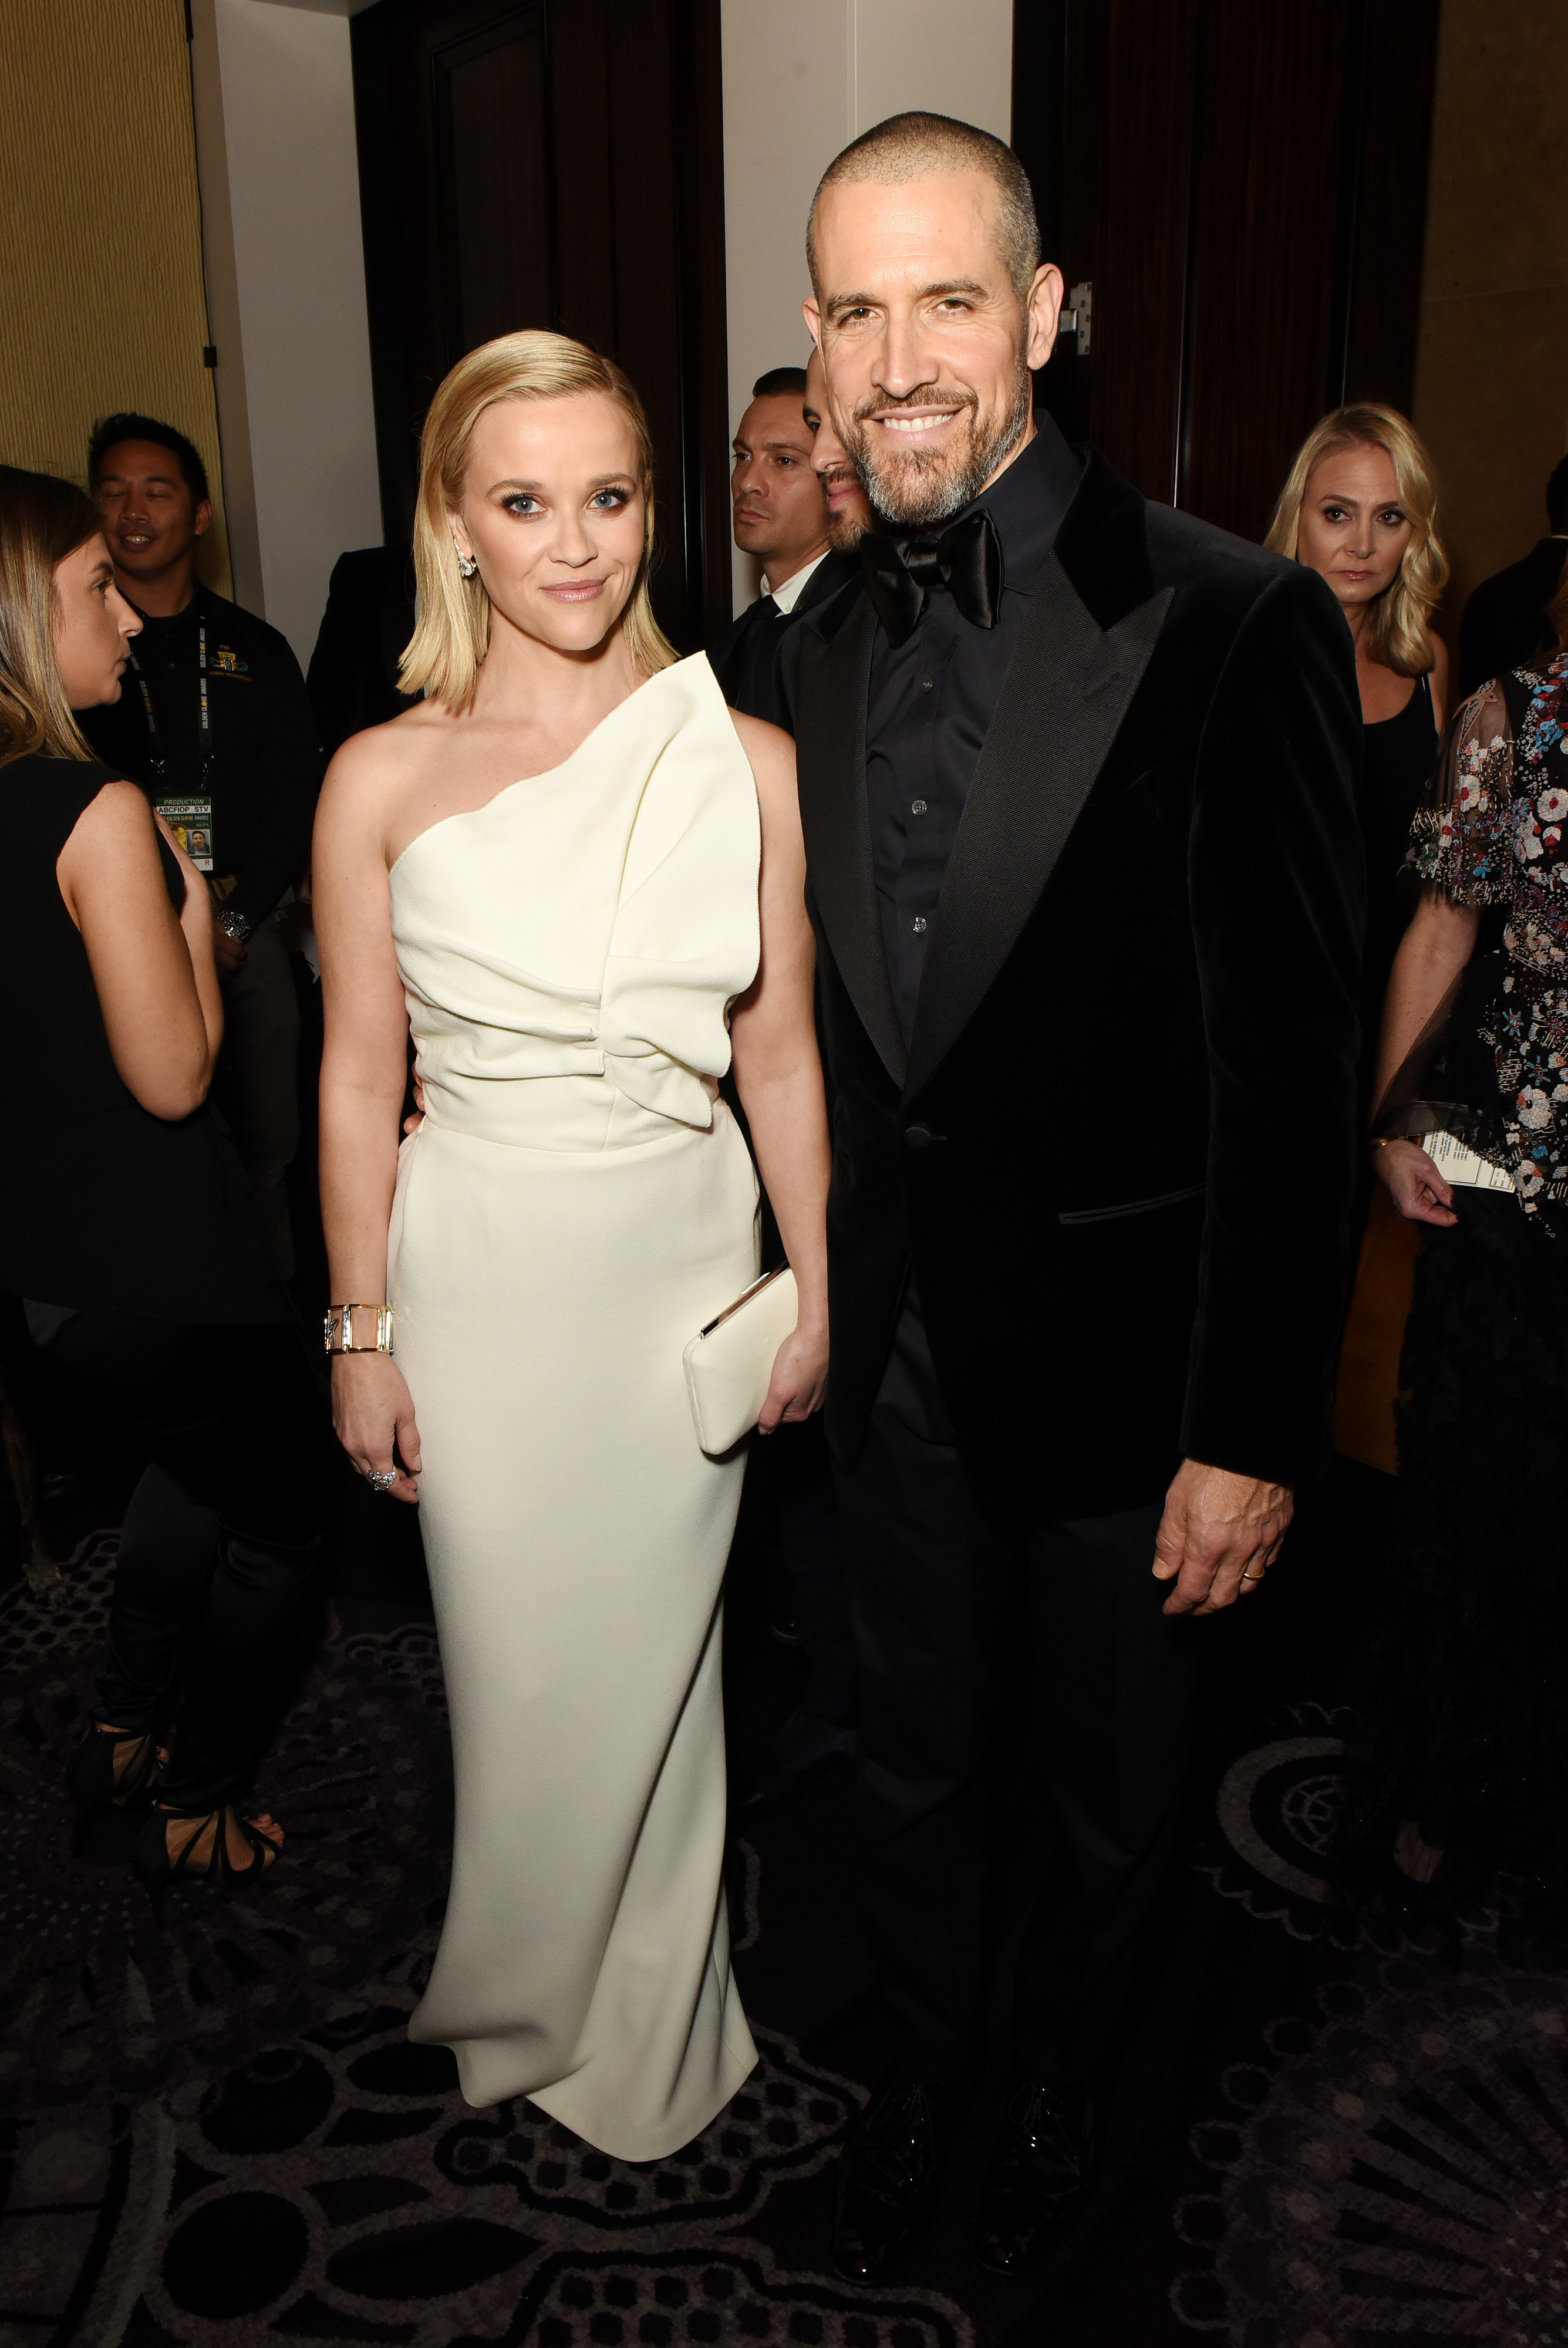 Jim Toth and Reese Witherspoon in California in 2020 | Source: Getty Images